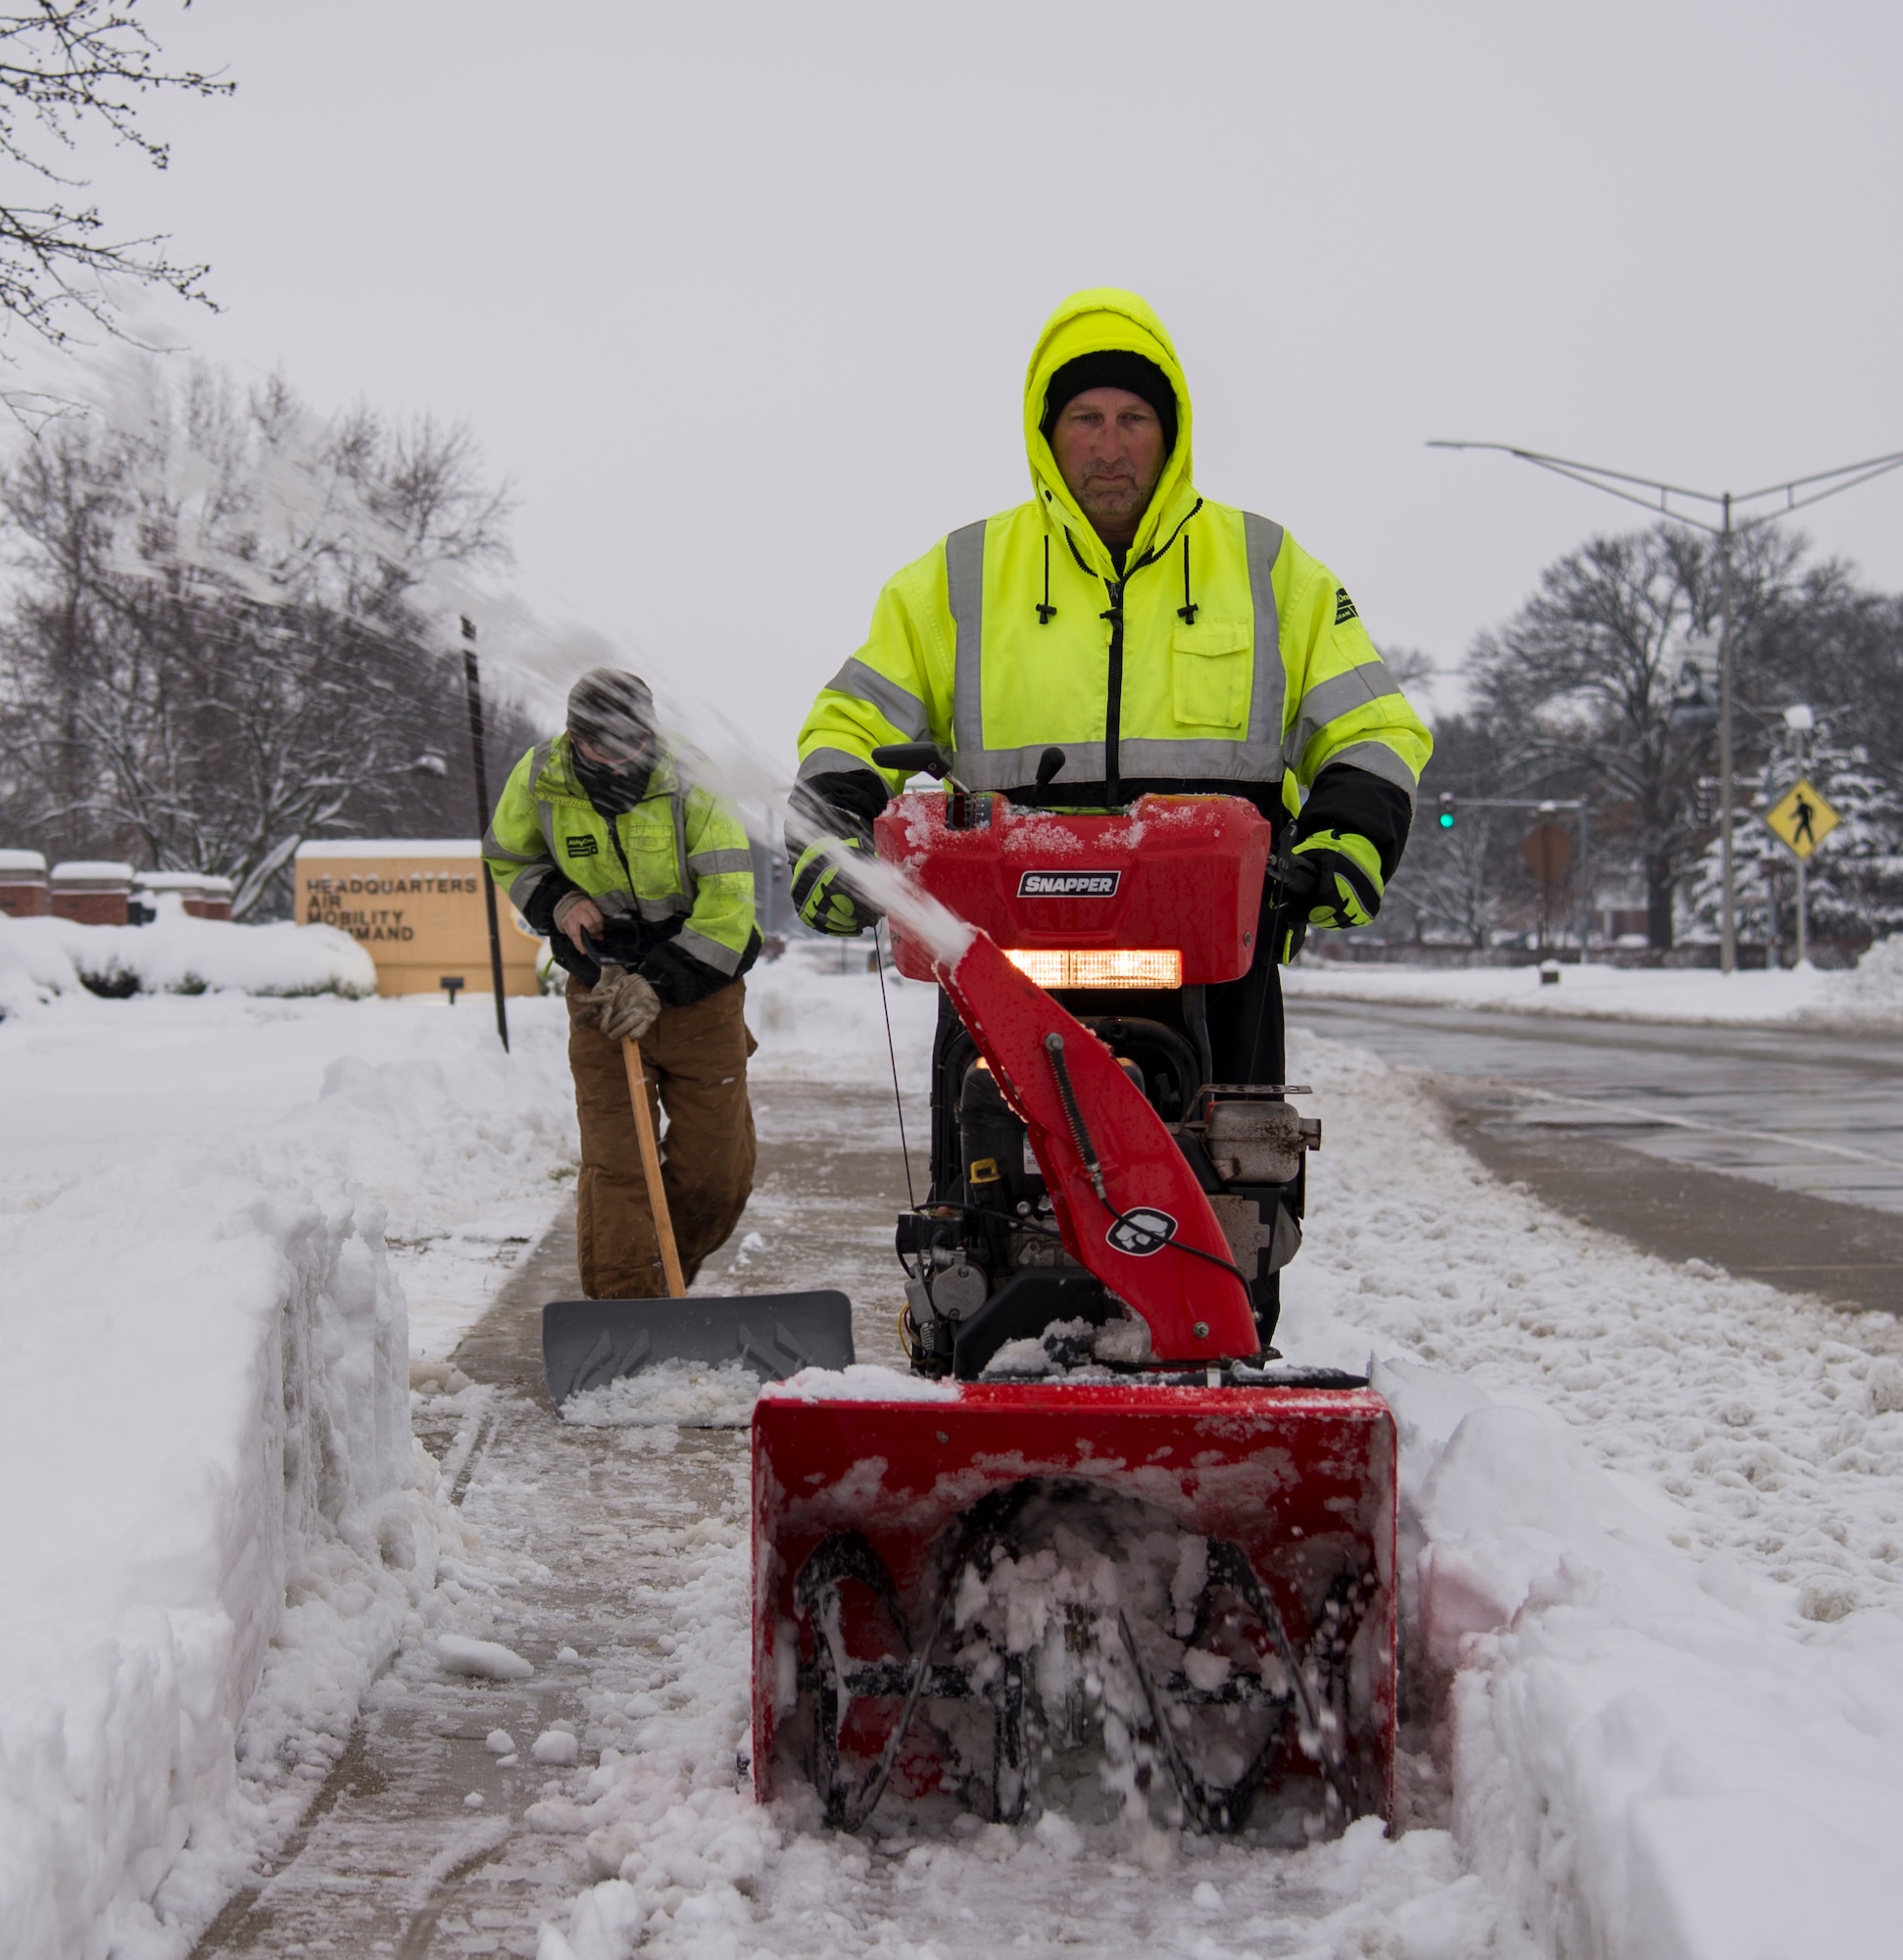 Members of the Ability One Program ground maintenance, clear the sidewalk in front of Air Mobility Command Headquarters, Jan. 12, 2019, at Scott Air Force Base, Ill. Members of the Ability One Program assisted with snow and ice removal alongside members of the 375th Civil Engineer Squadron.